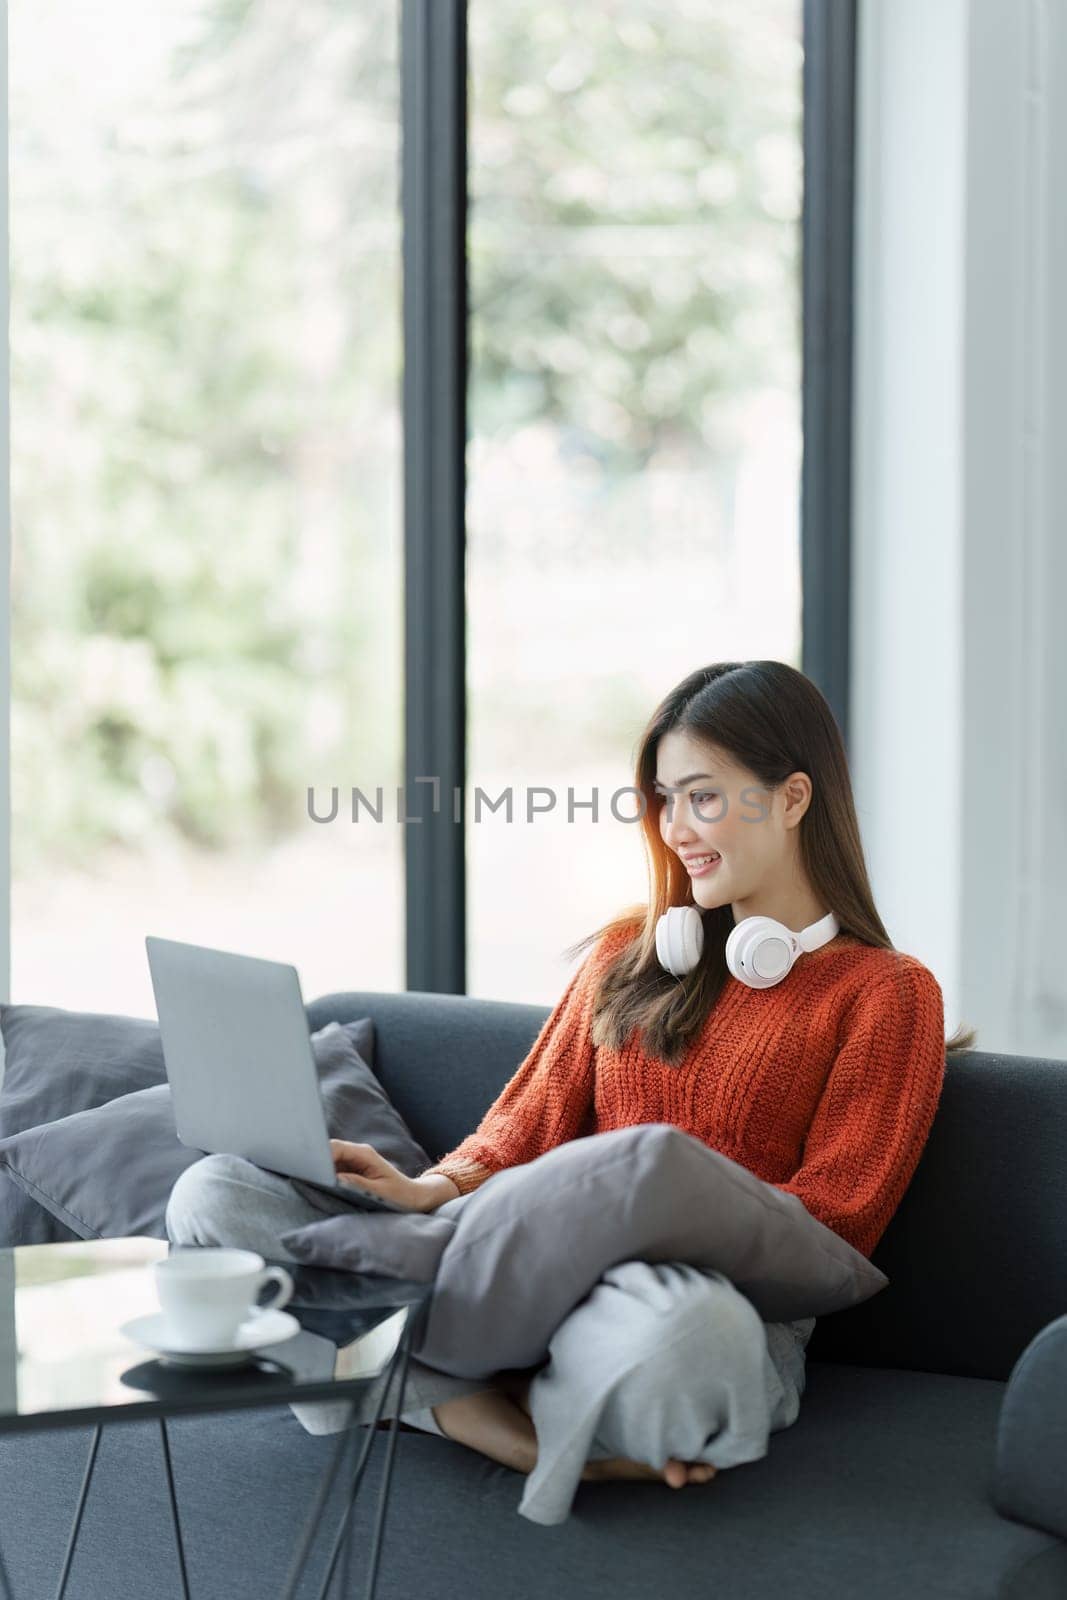 Beautiful Asian Woman relaxing at home and using laptop computer sitting on cozy sofa.